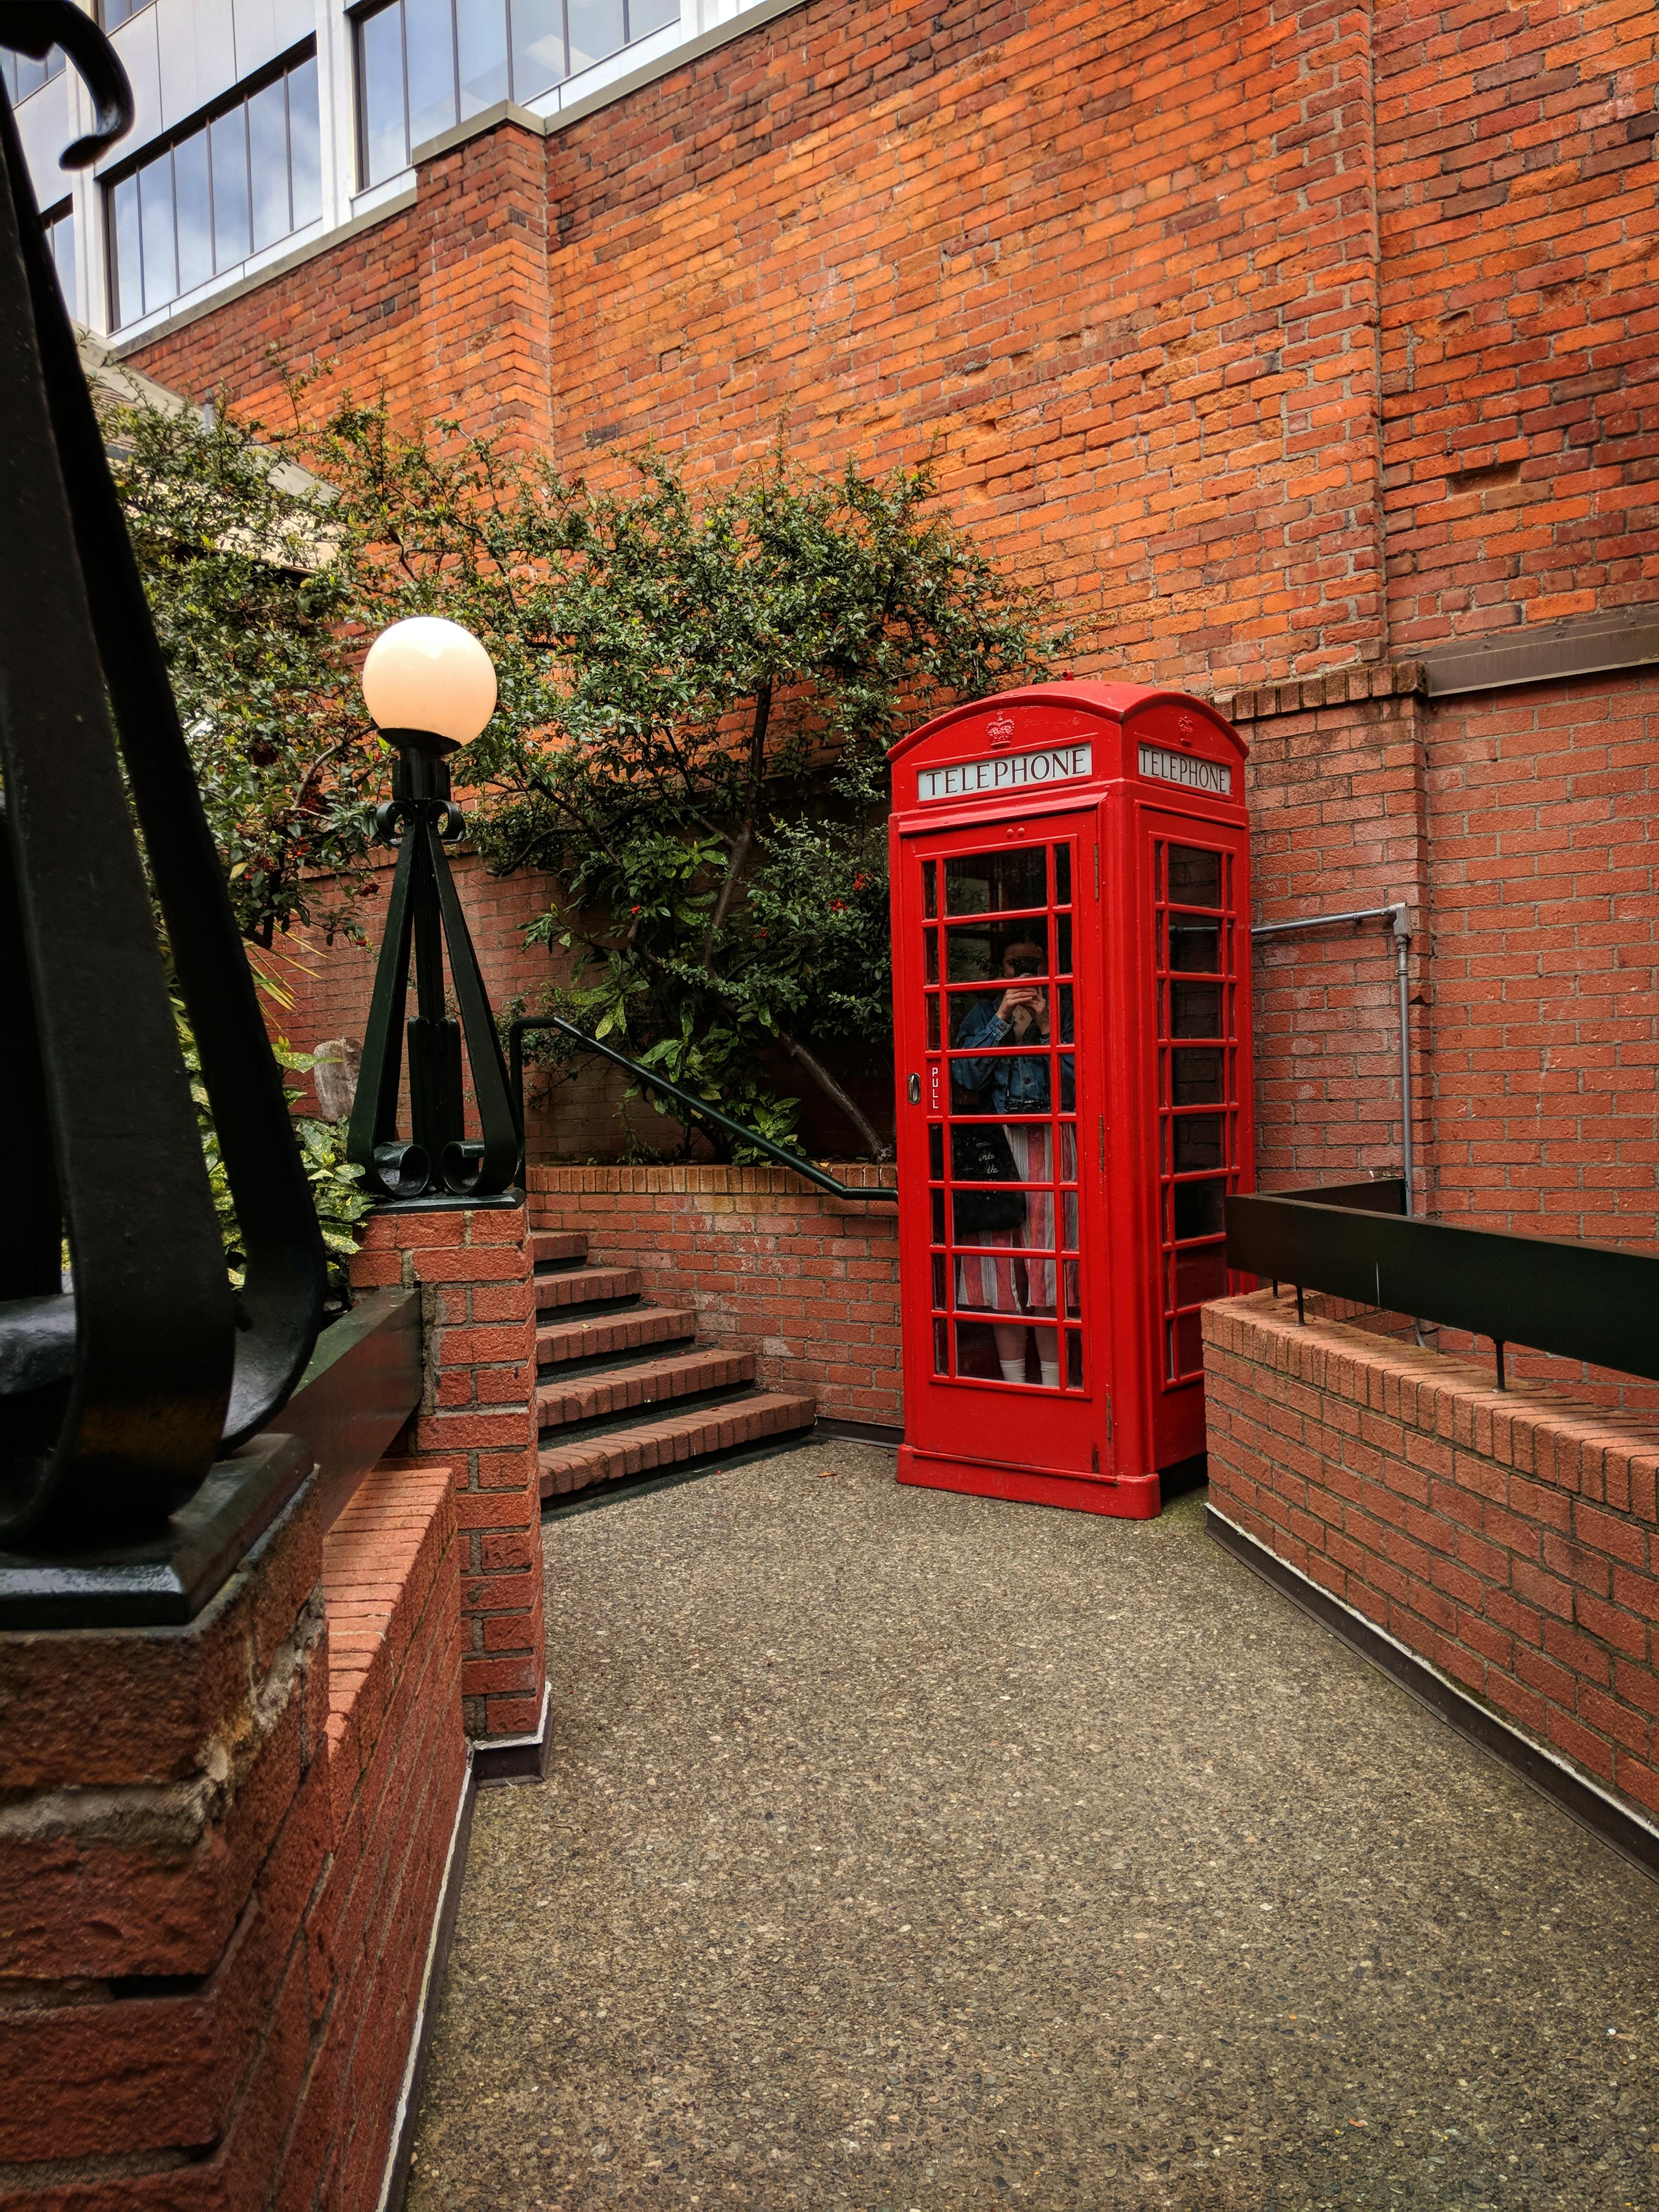 Free stock photo of brick, phone booth, telephone booth